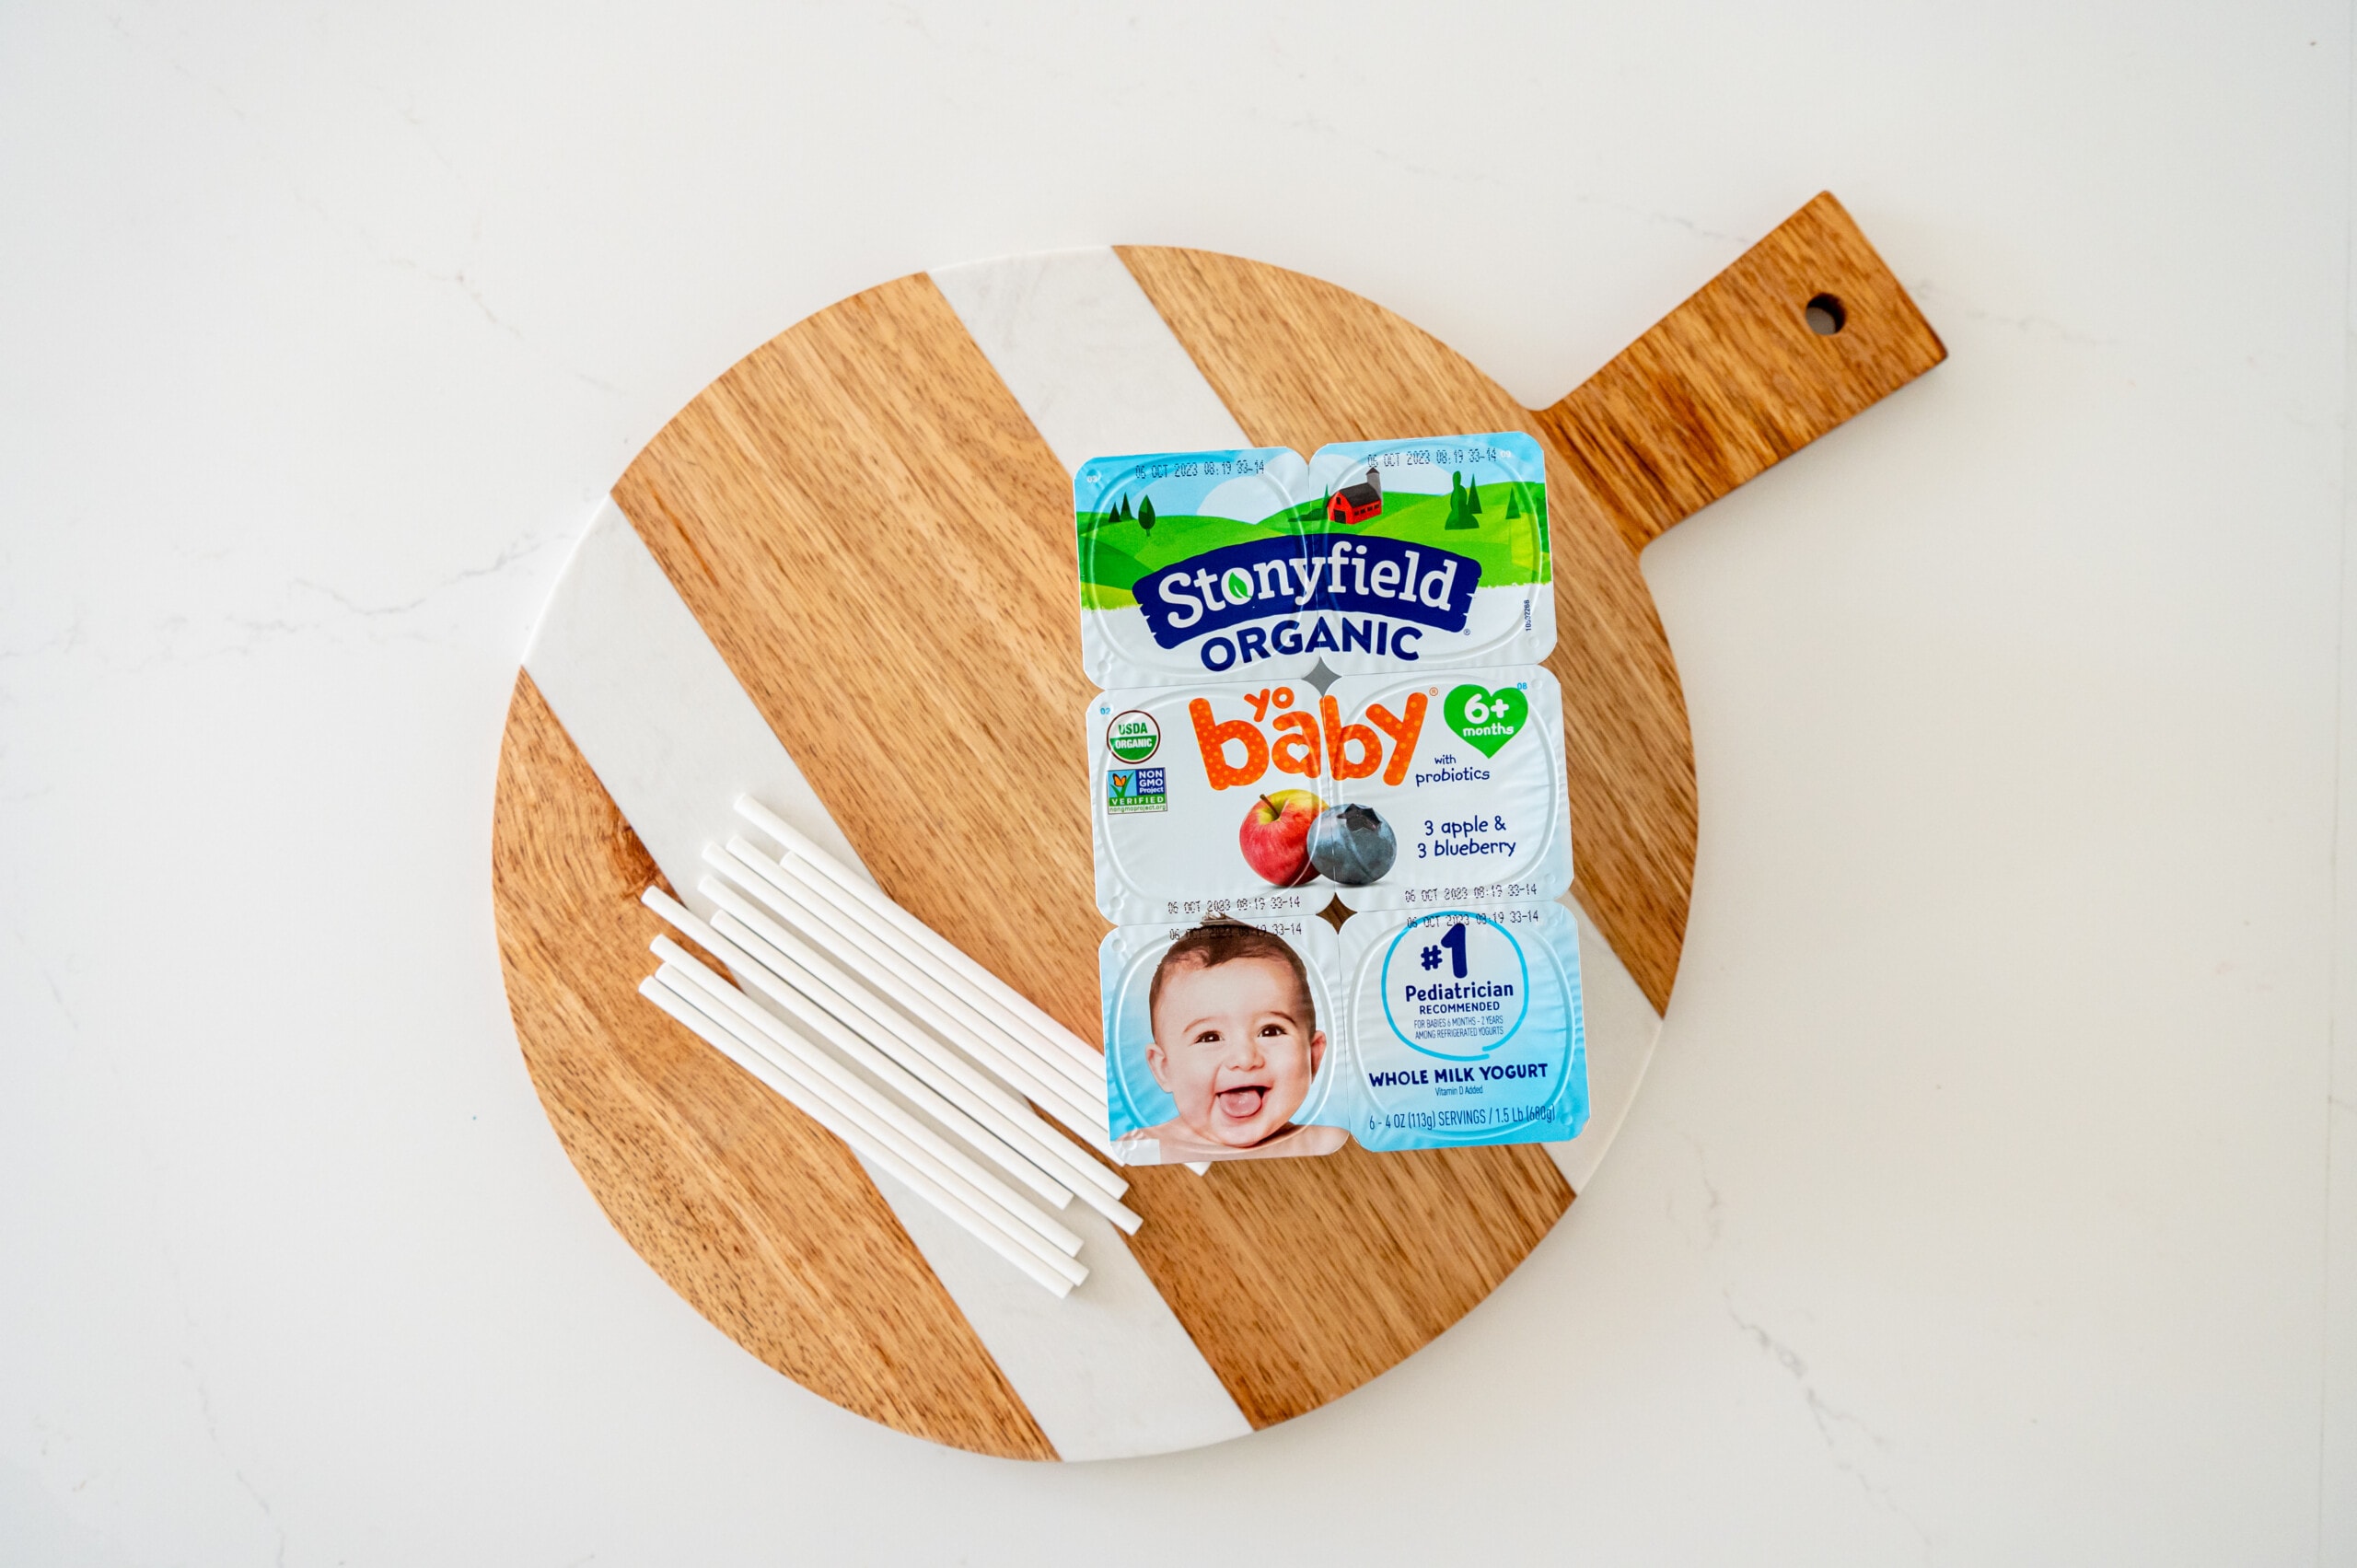 Stonyfield Yobaby yogurt and cookie sticks on a cheese board